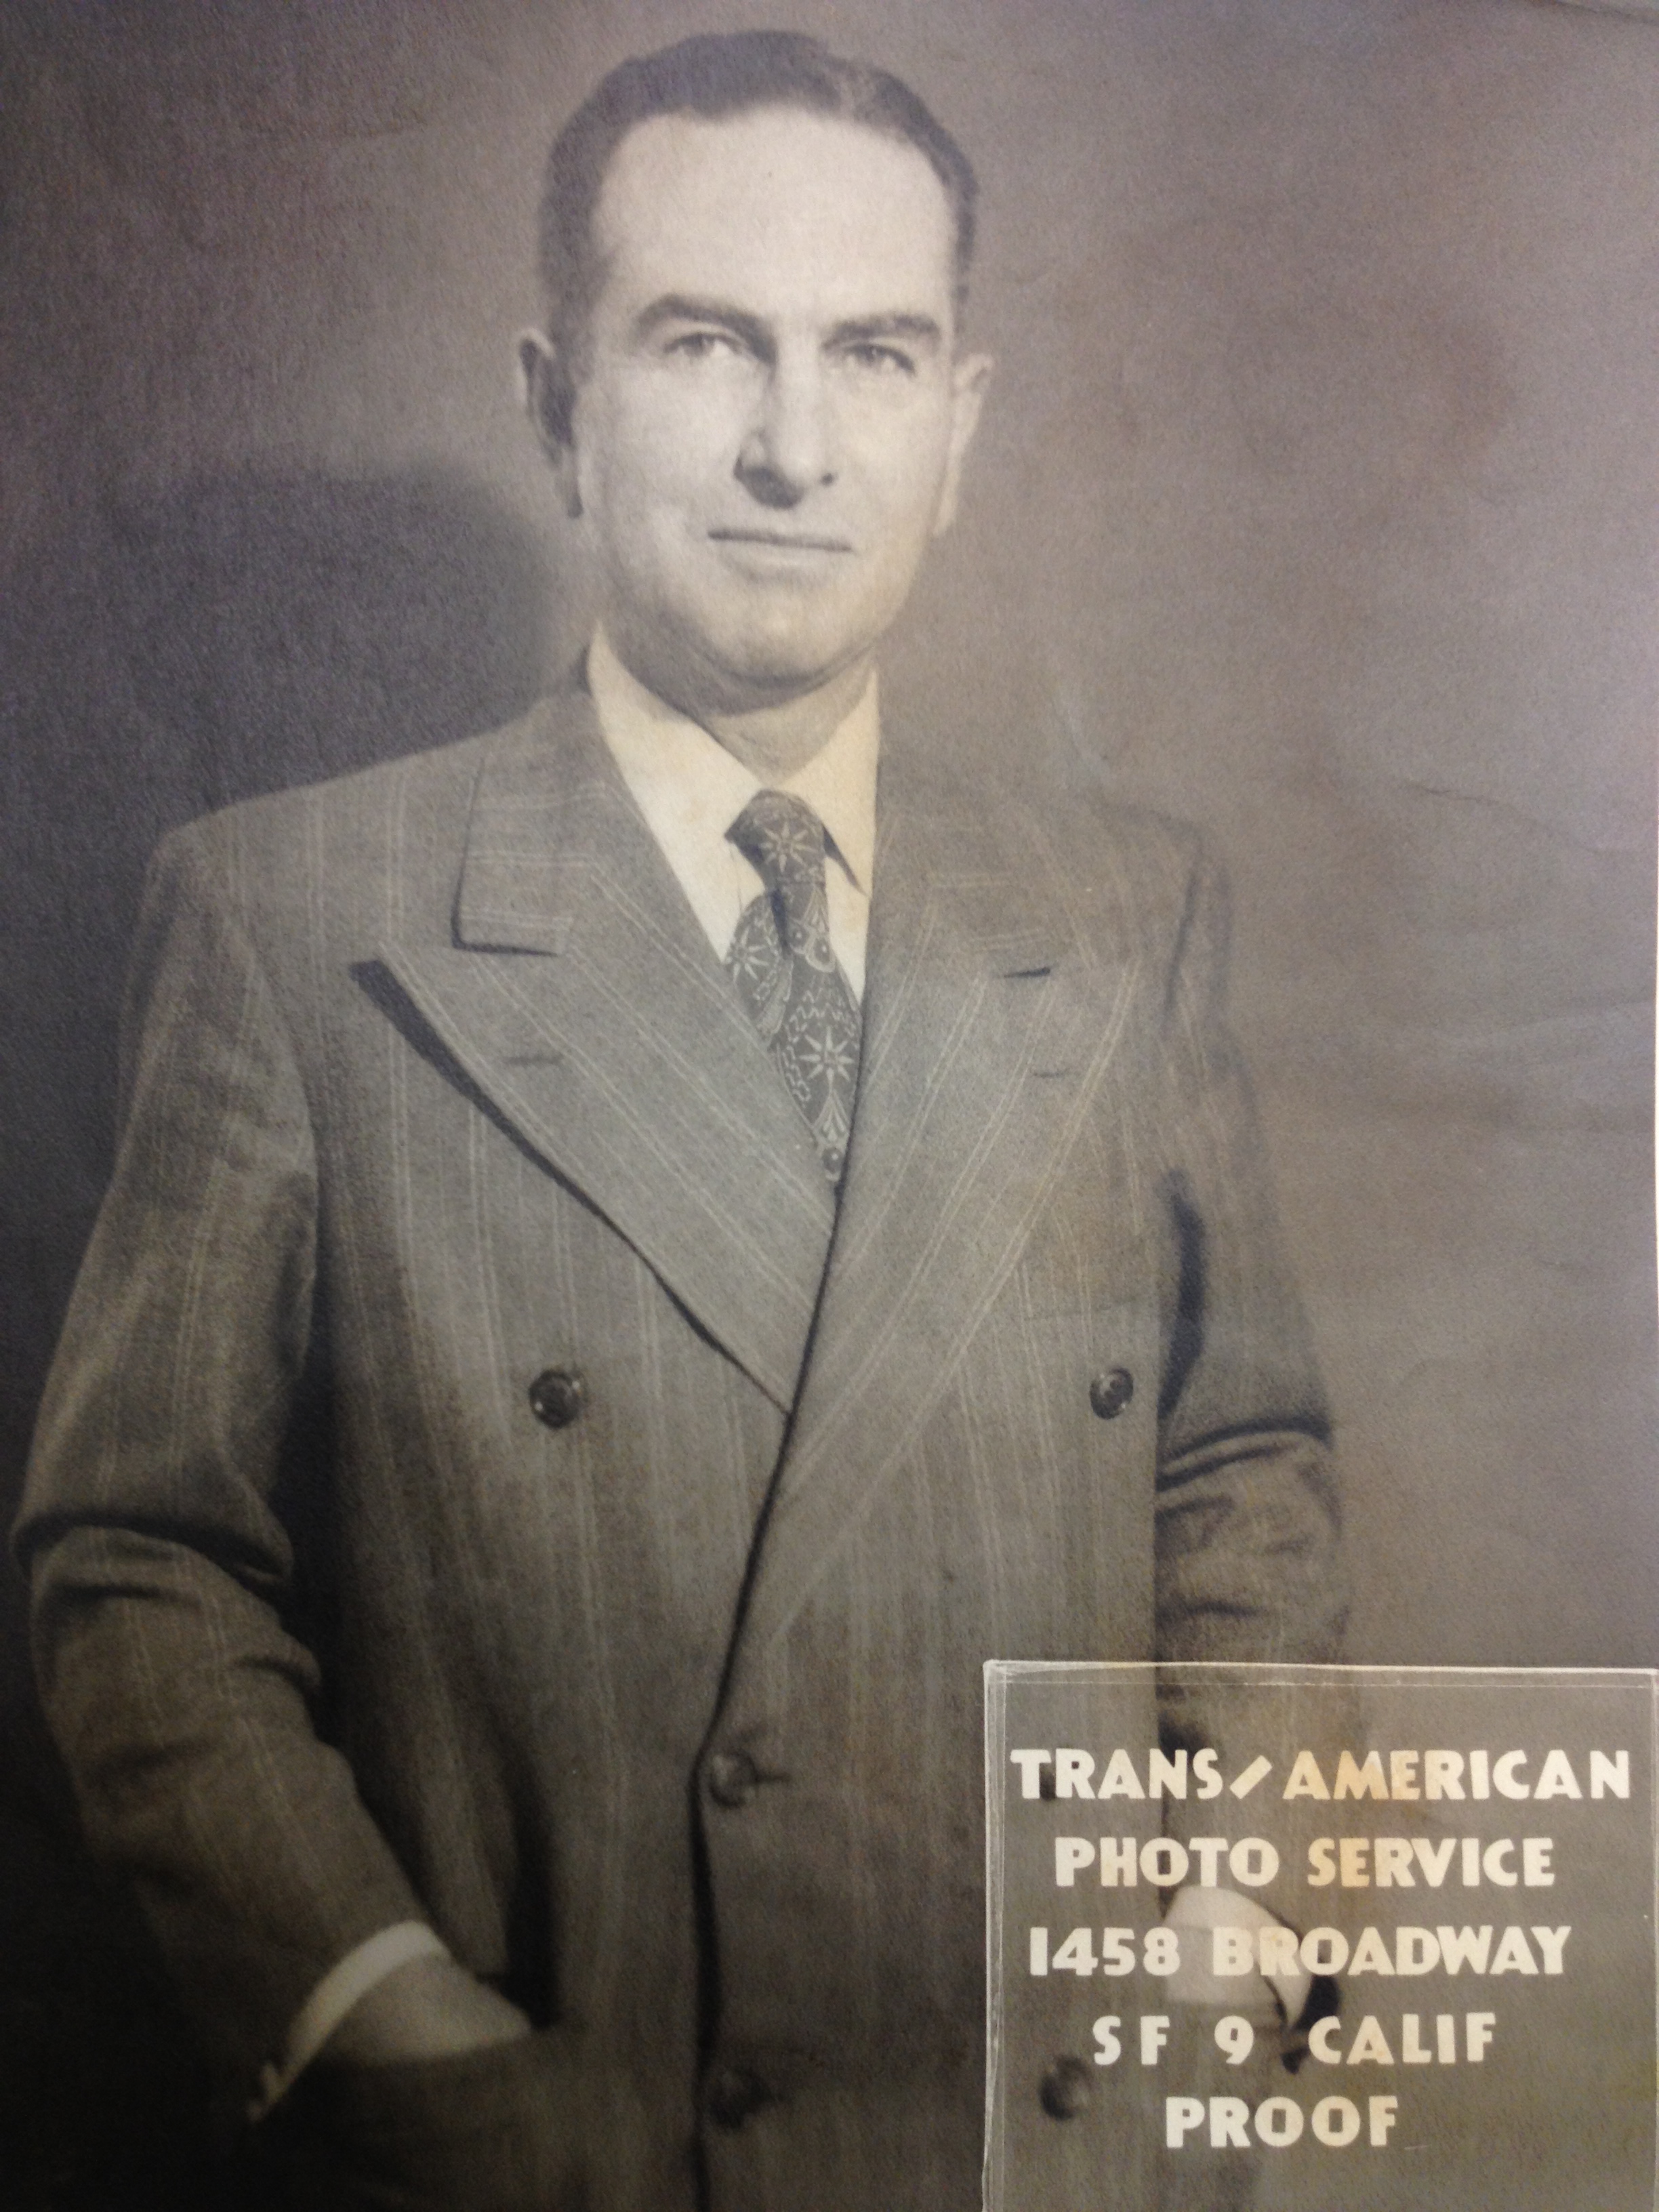   Thomas Russell Merrill, known as T.R., founded Merrill Farms in 1933.&nbsp;  